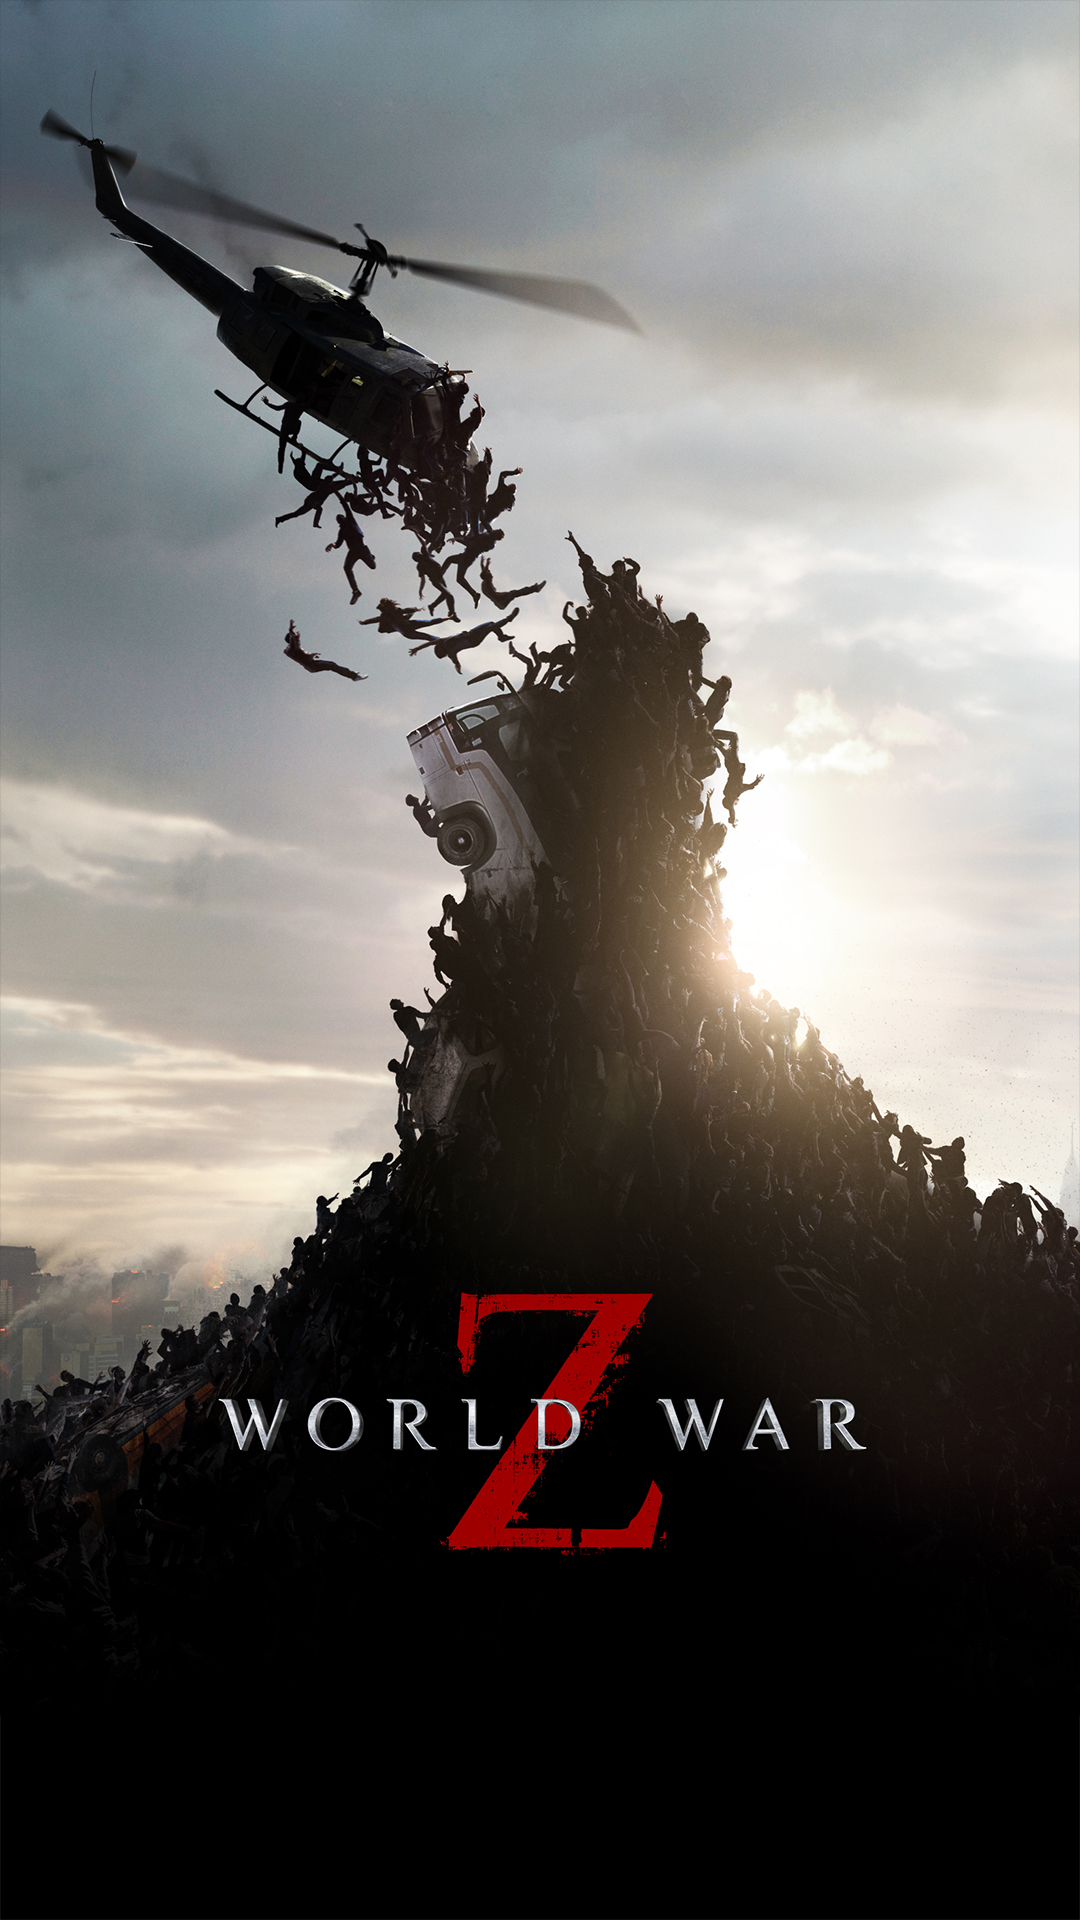 World War Z Htc One Wallpaper Best And Easy